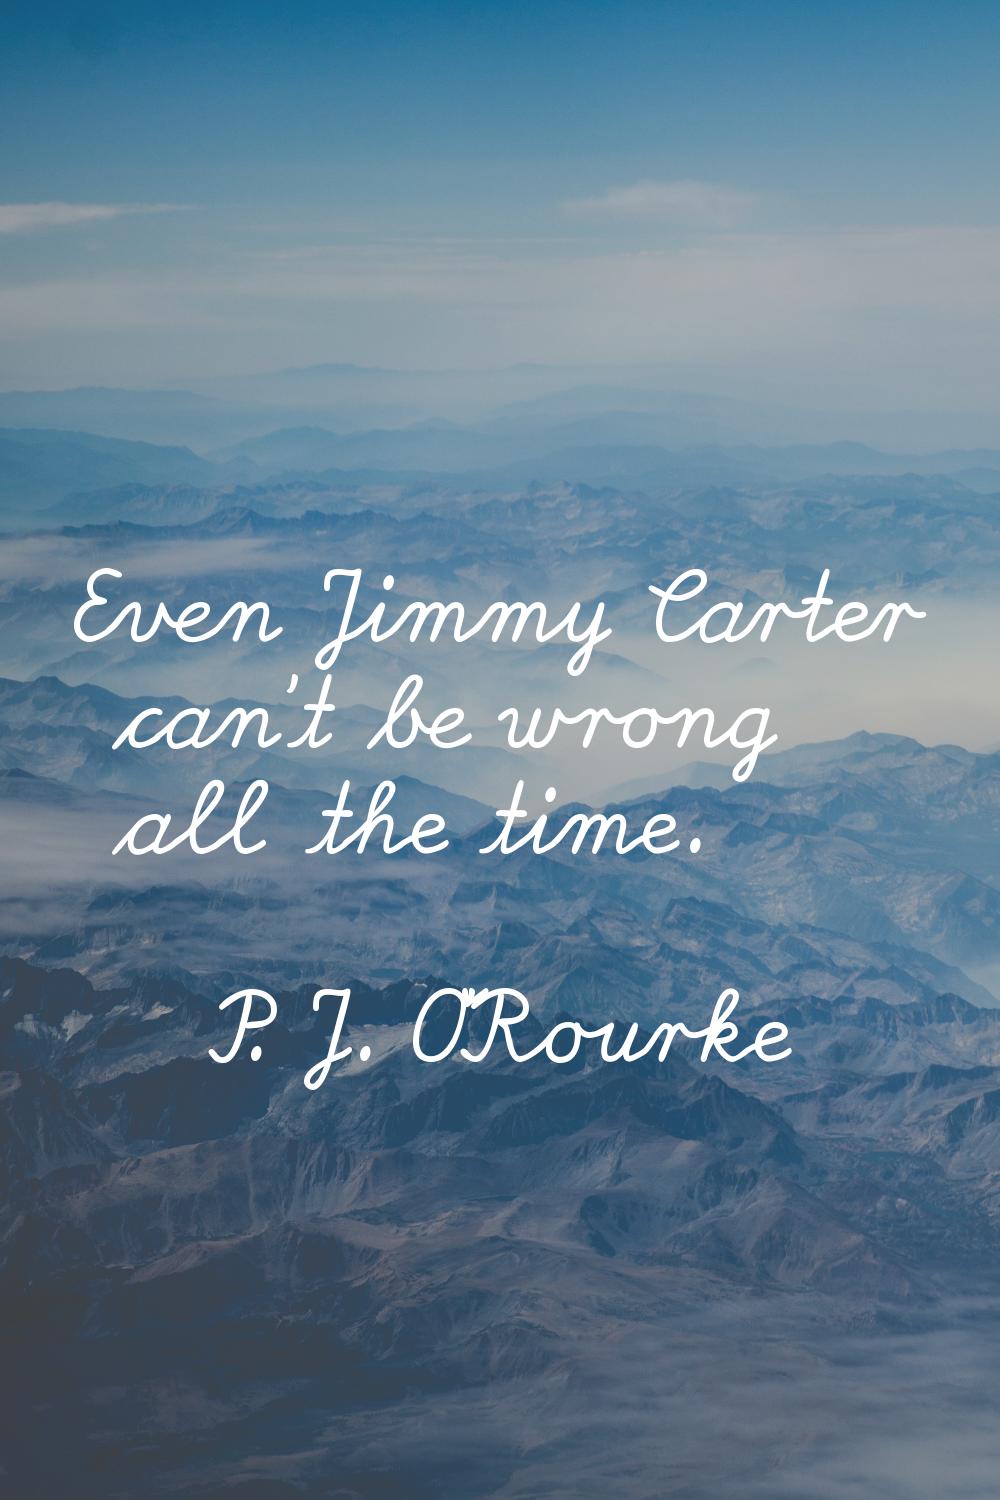 Even Jimmy Carter can't be wrong all the time.